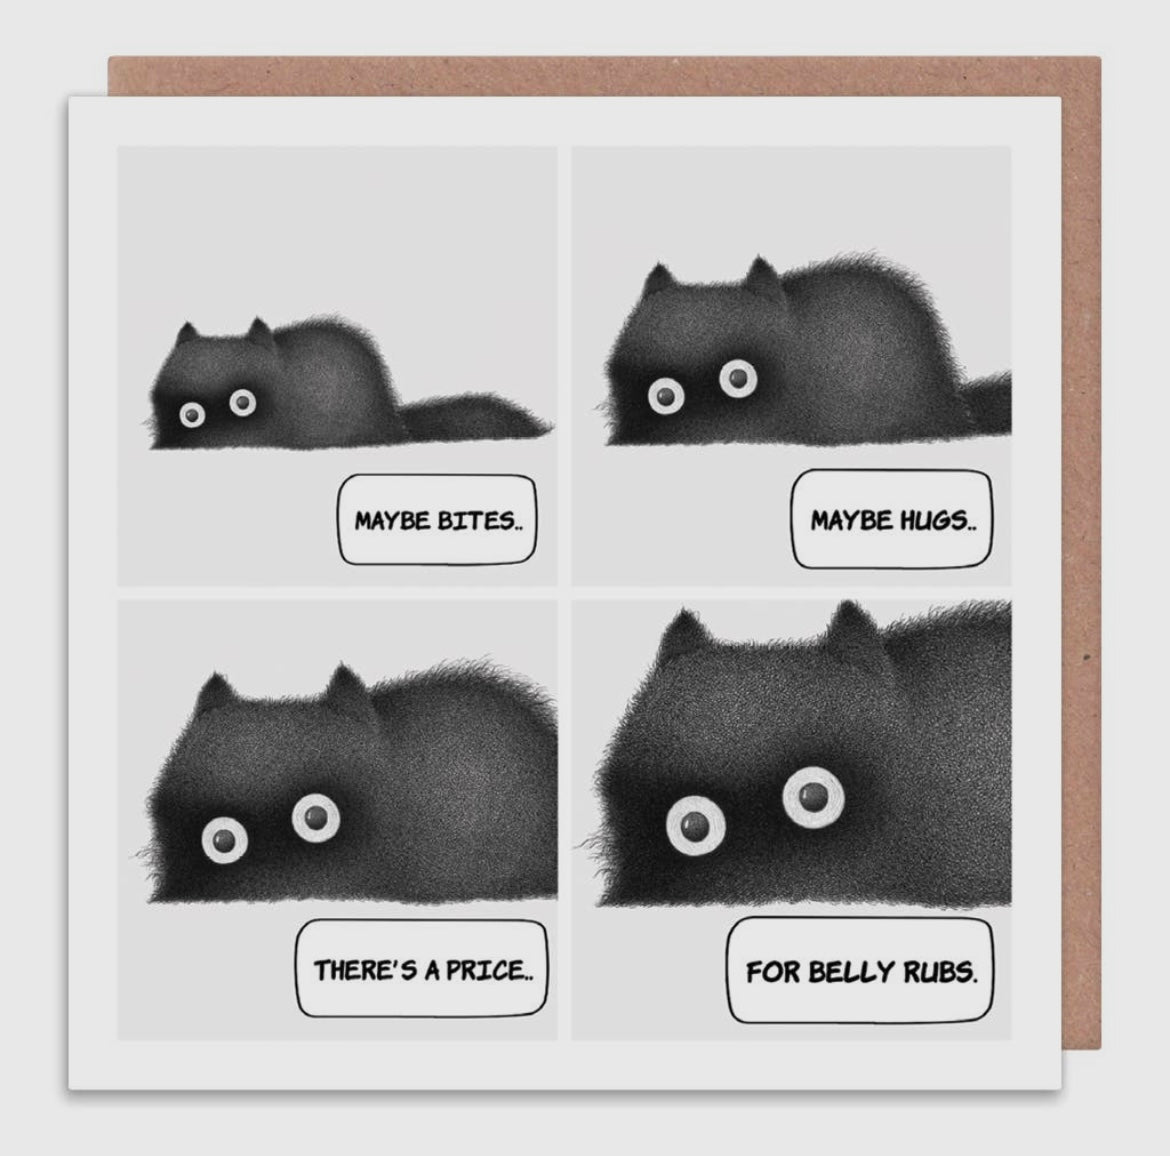 Price for Belly Rubs Card